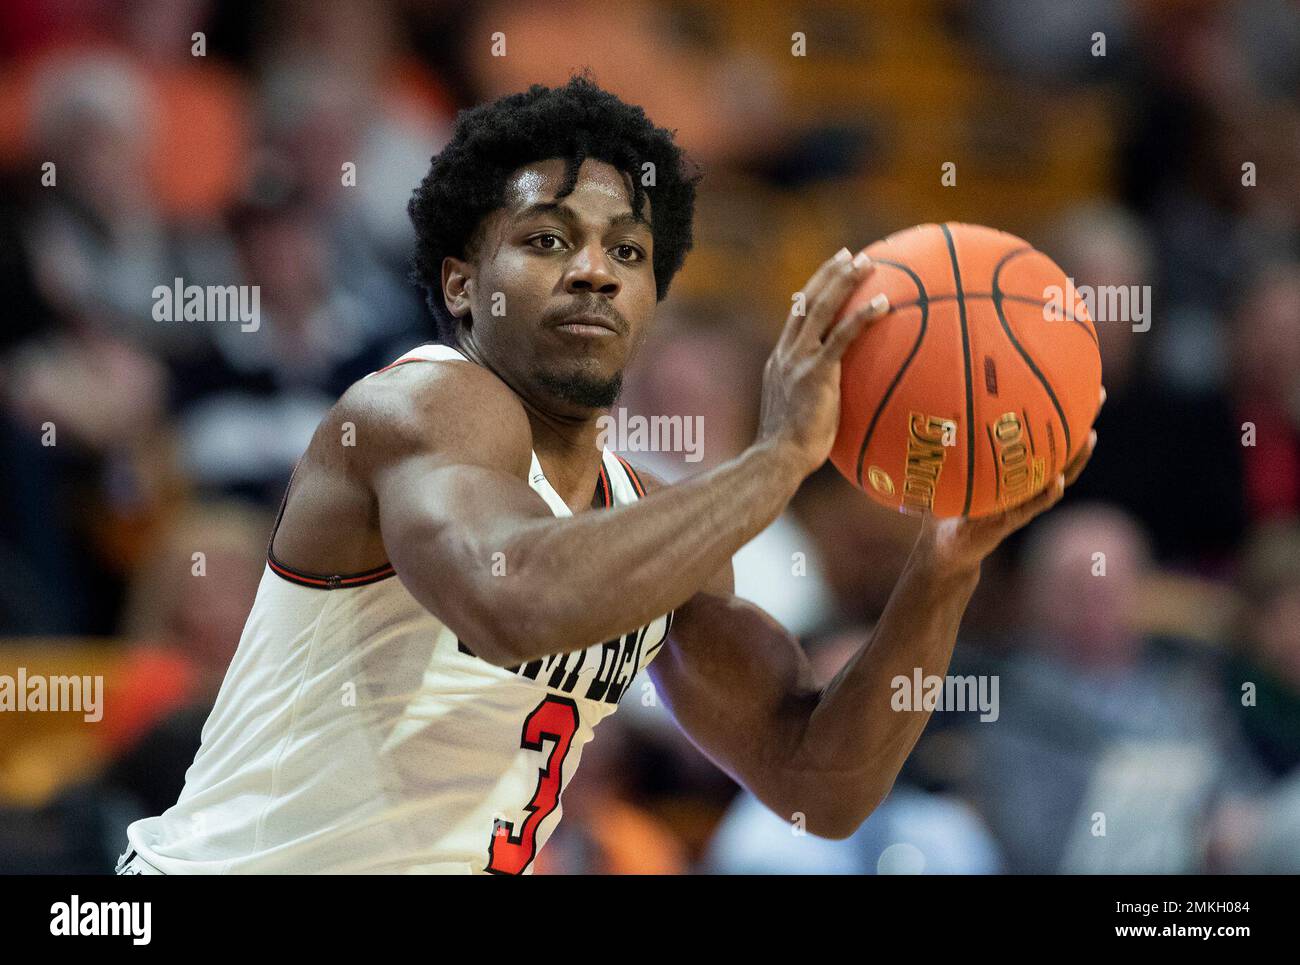 Campbell University guard Chris Clemons readies to pass the basketball  against Presbyterian College in the second half of an NCAA basketball game  Thursday, Jan. 24, 2019 in Buies Creek, N.C. Clemons keeps